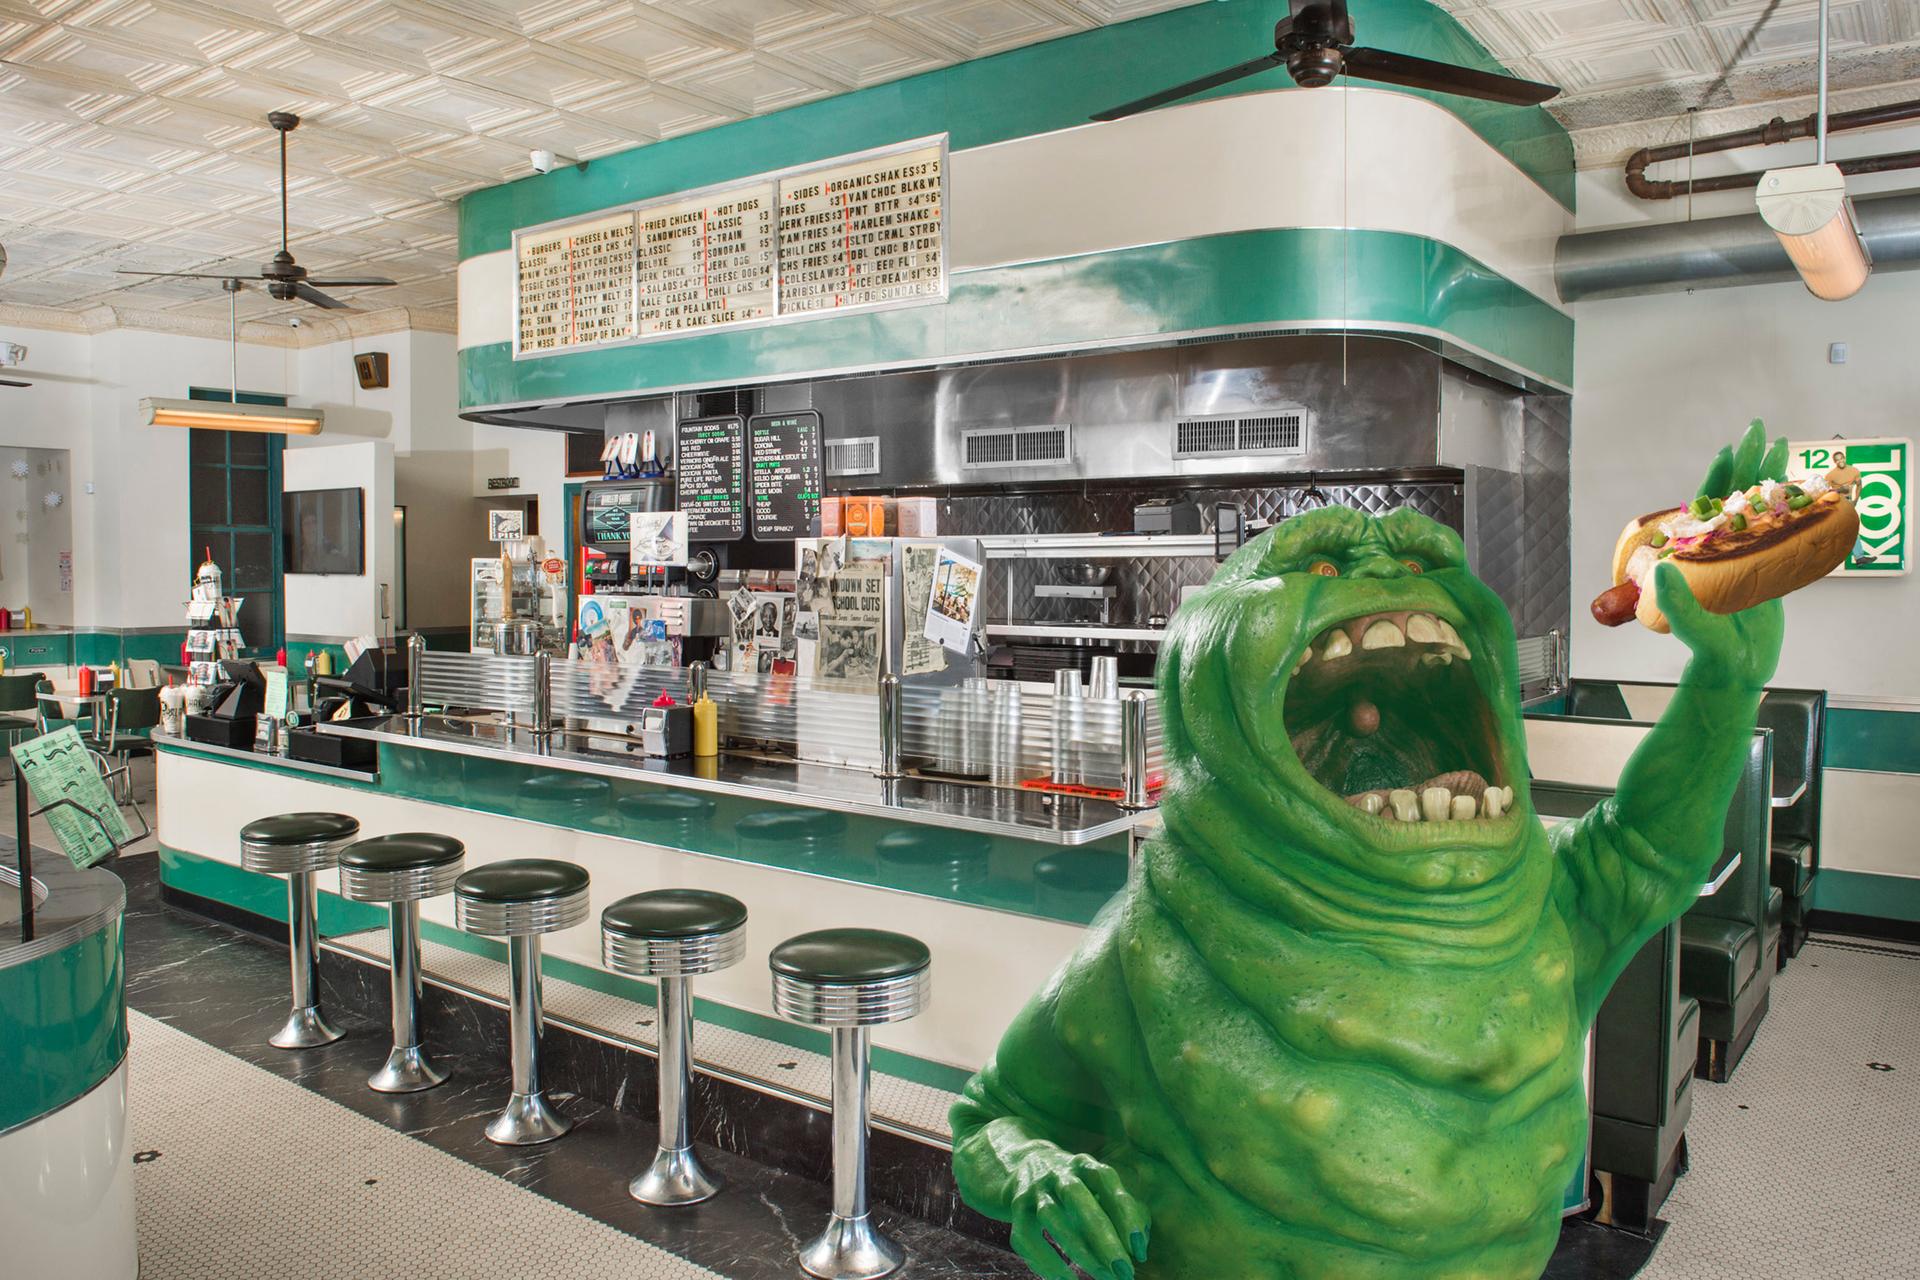 Slimer from Ghostbusters eating a hot dog at Harlem Shake